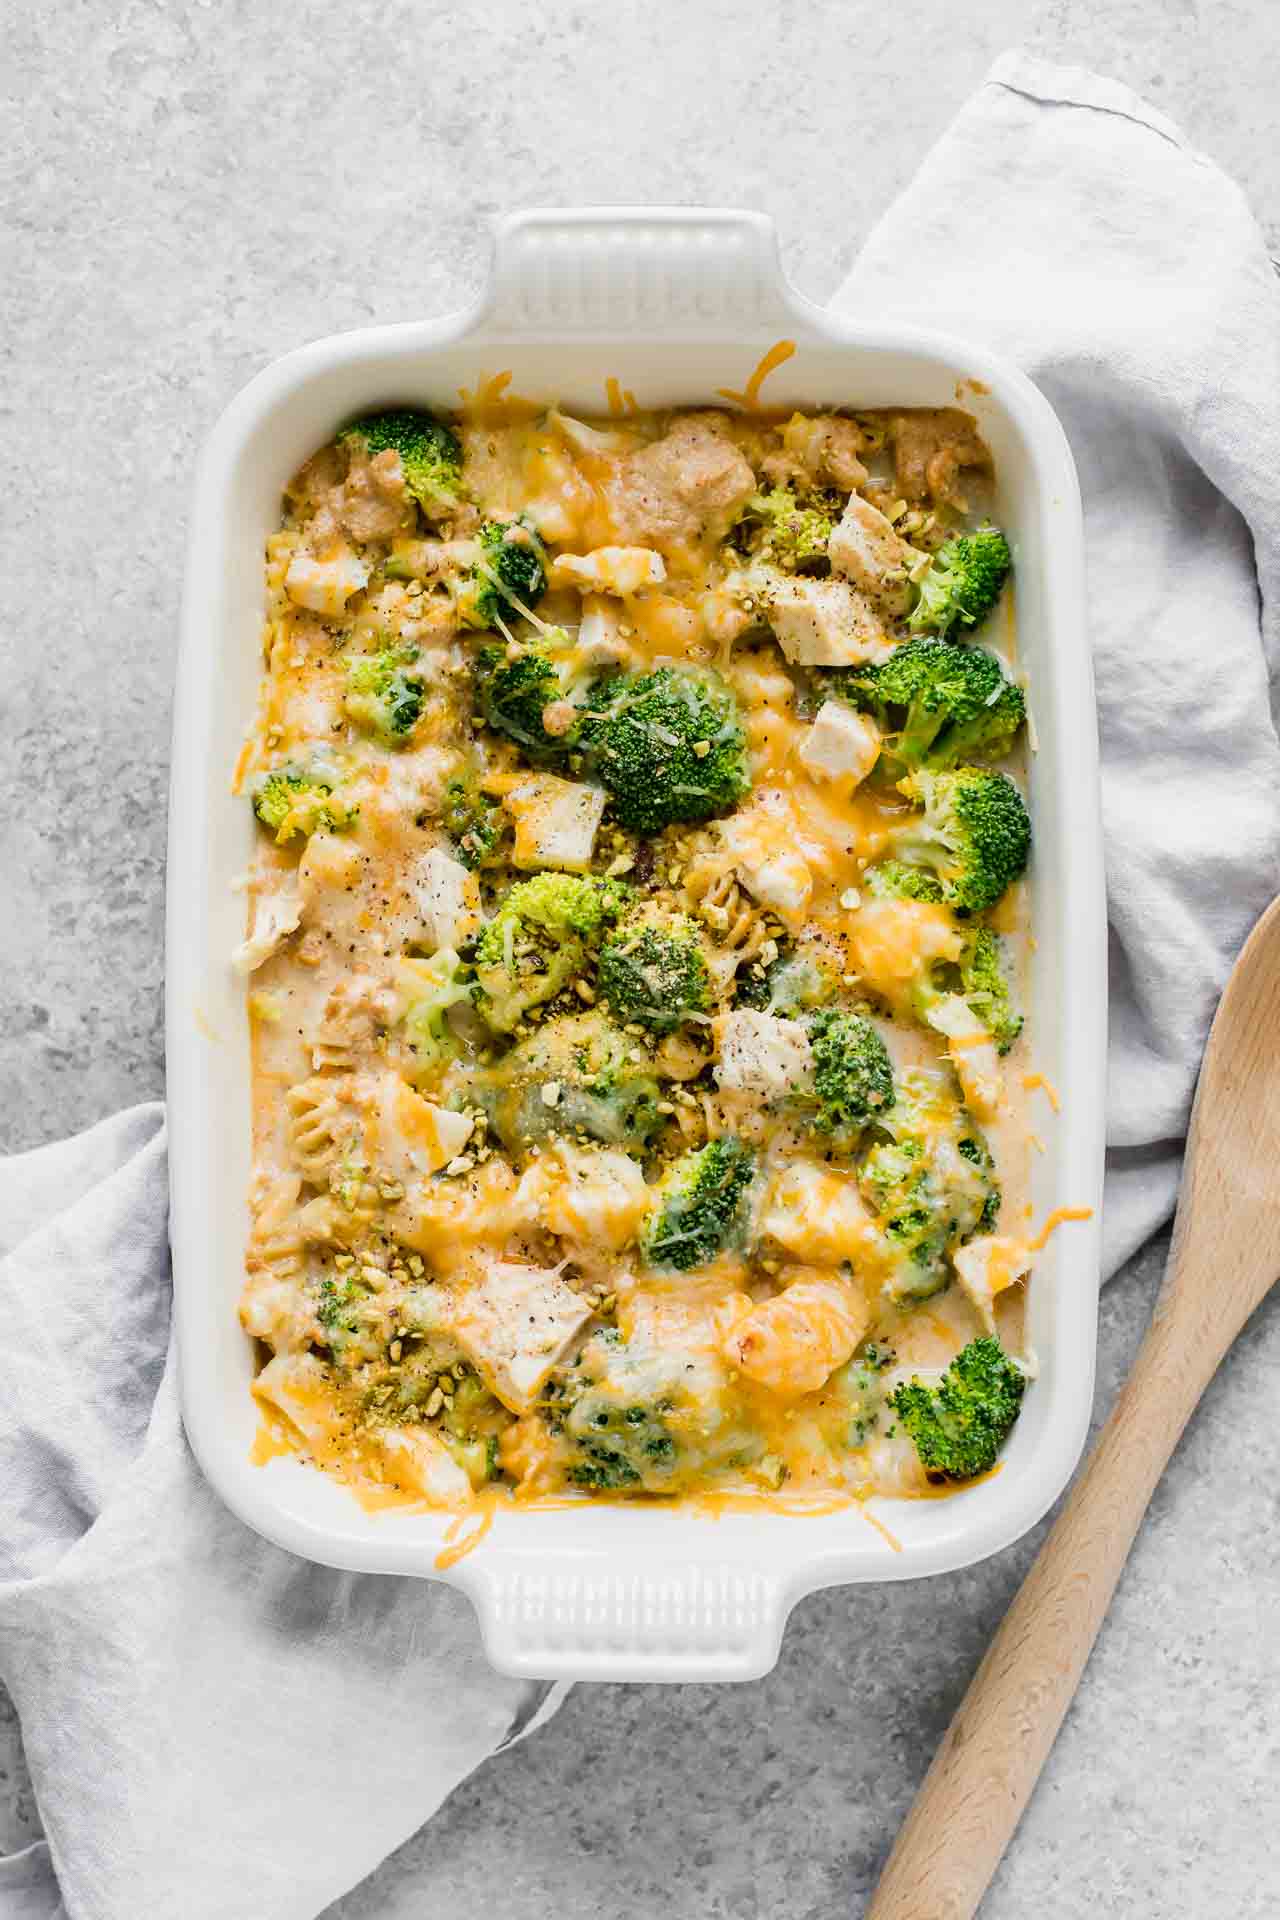 15 Easy Healthy Chicken and Broccoli Casserole – Easy Recipes To Make